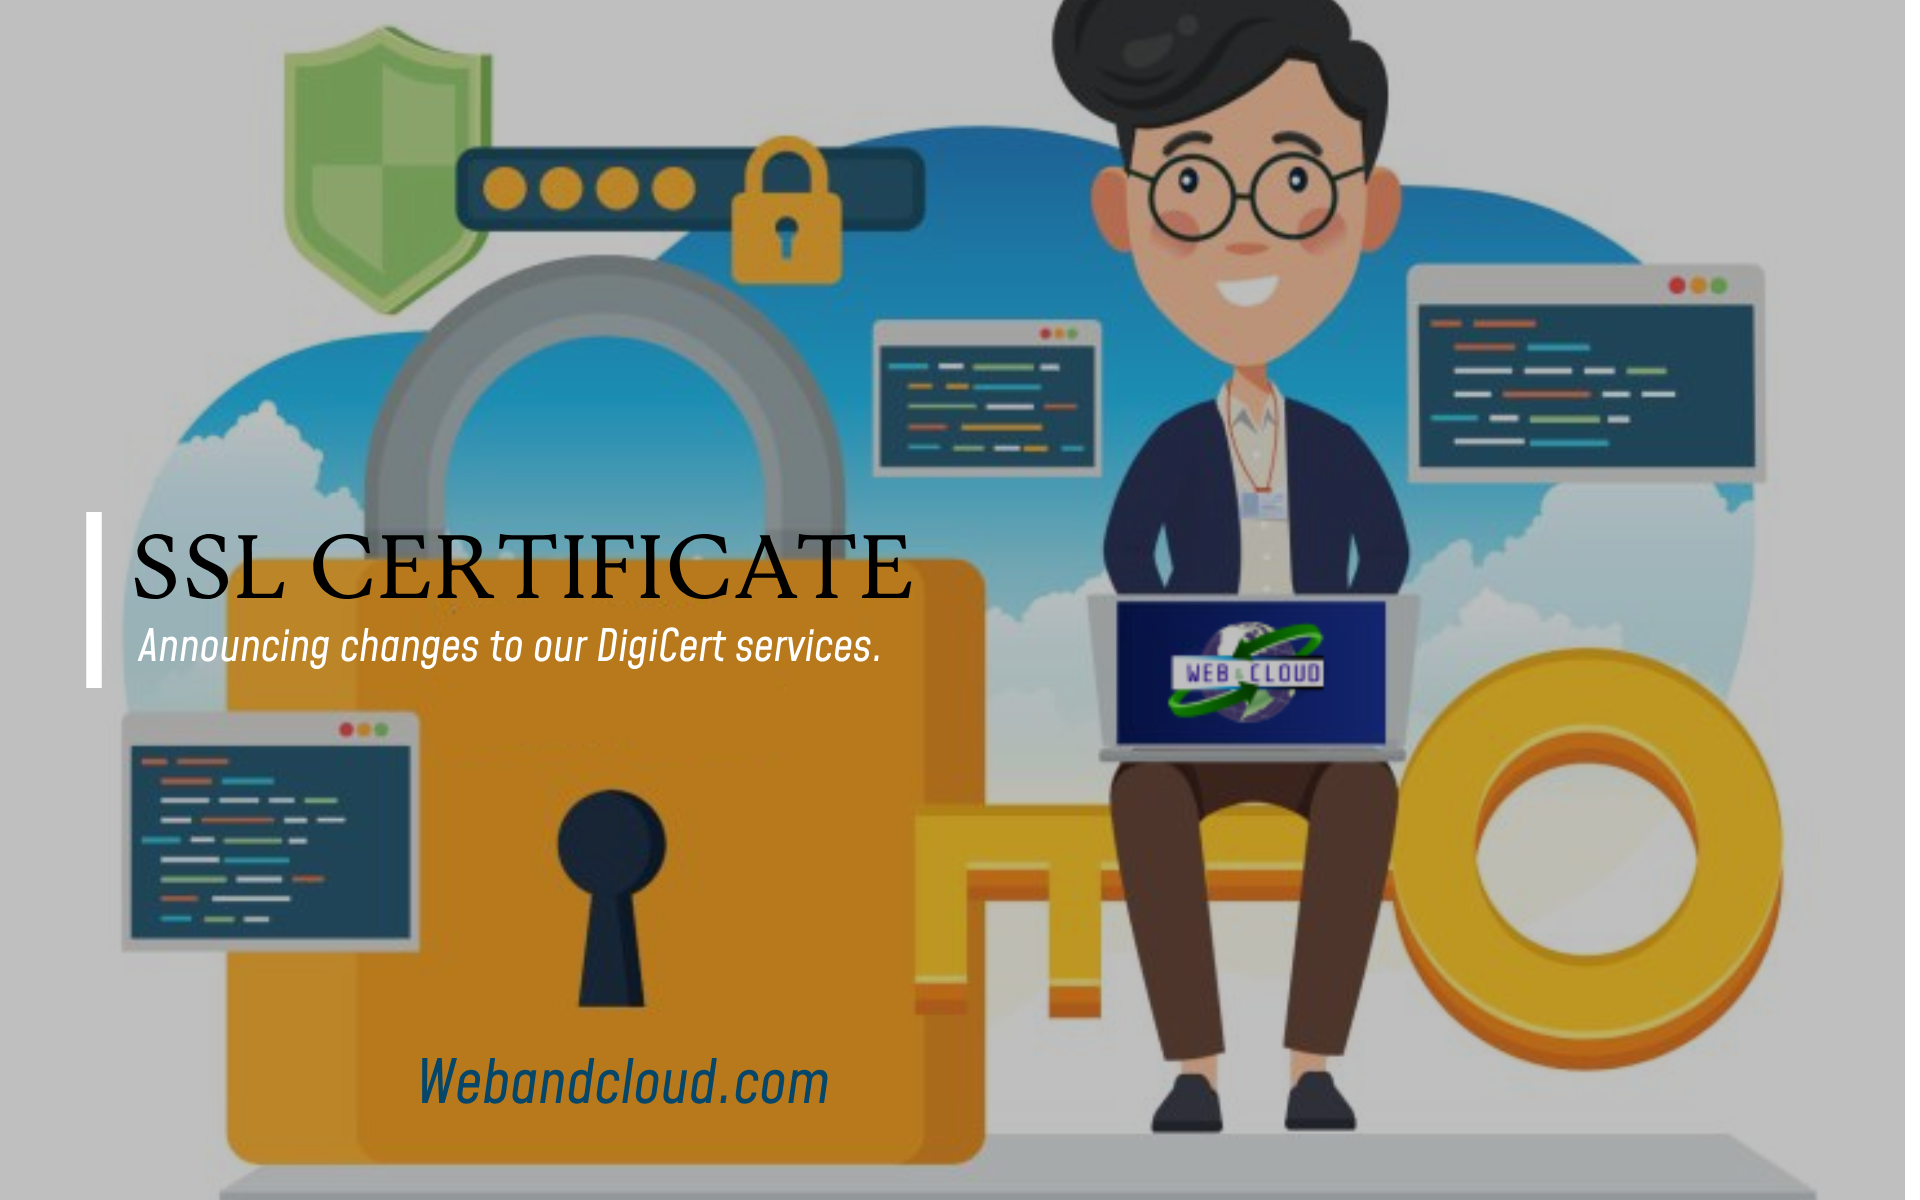 Web and Cloud will stop the support of 4, 5, and 6 years plans of DigiCert SSL Certificate for TLS and Verified Mark Certificates